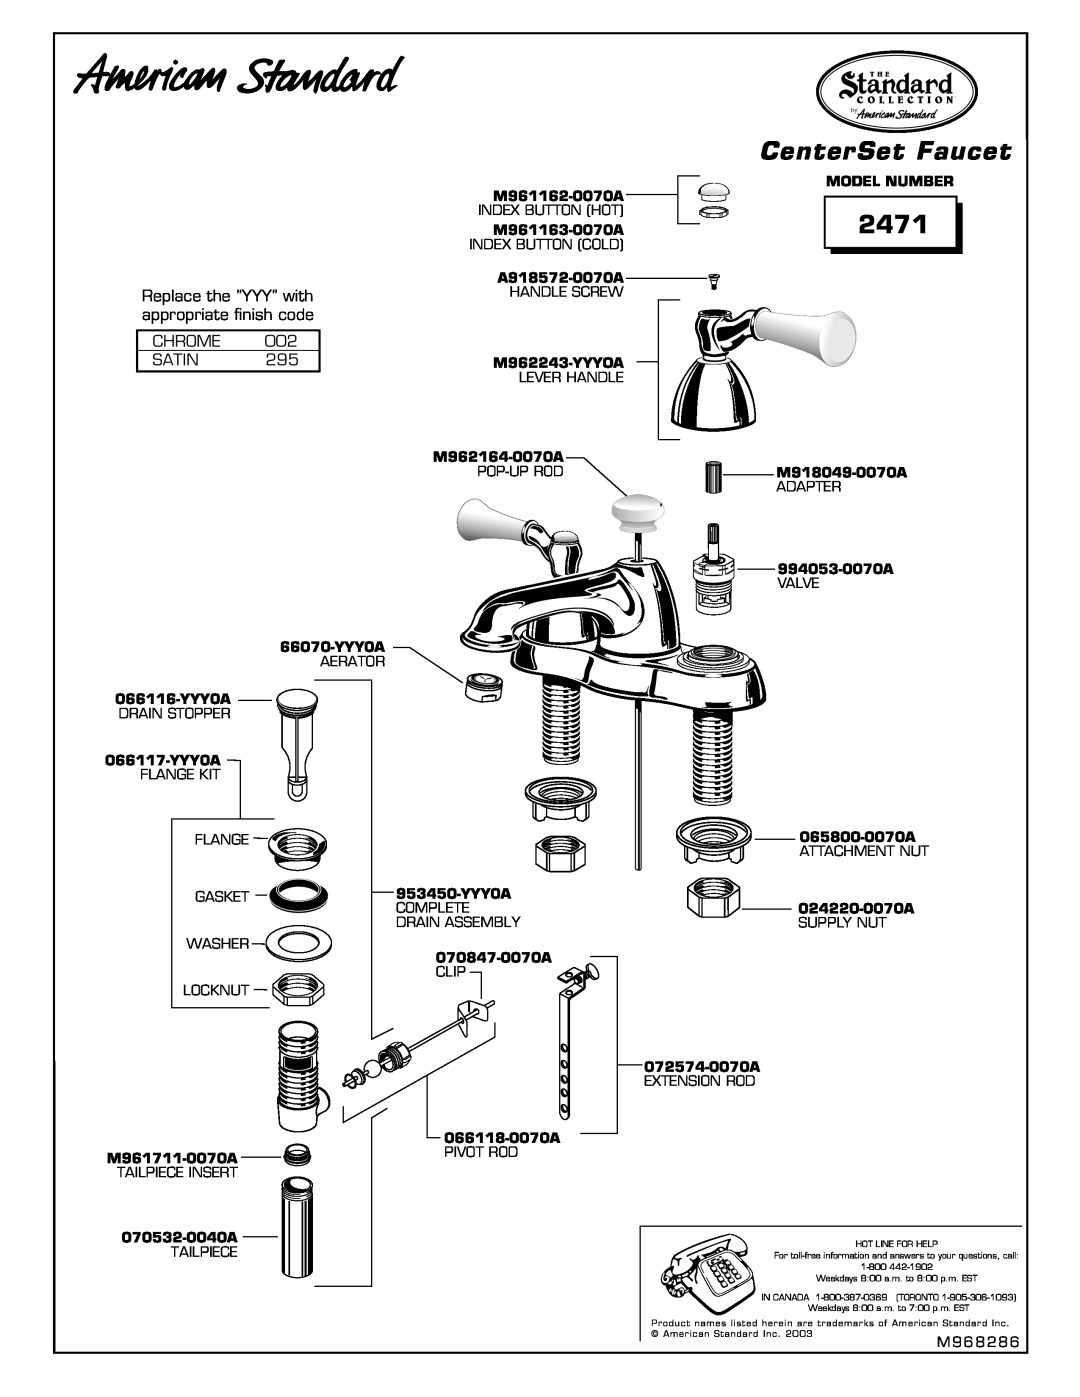 American Standard 2471 CenterSet Faucet, Replace the YYY with, appropriate finish code, Chrome Satin 